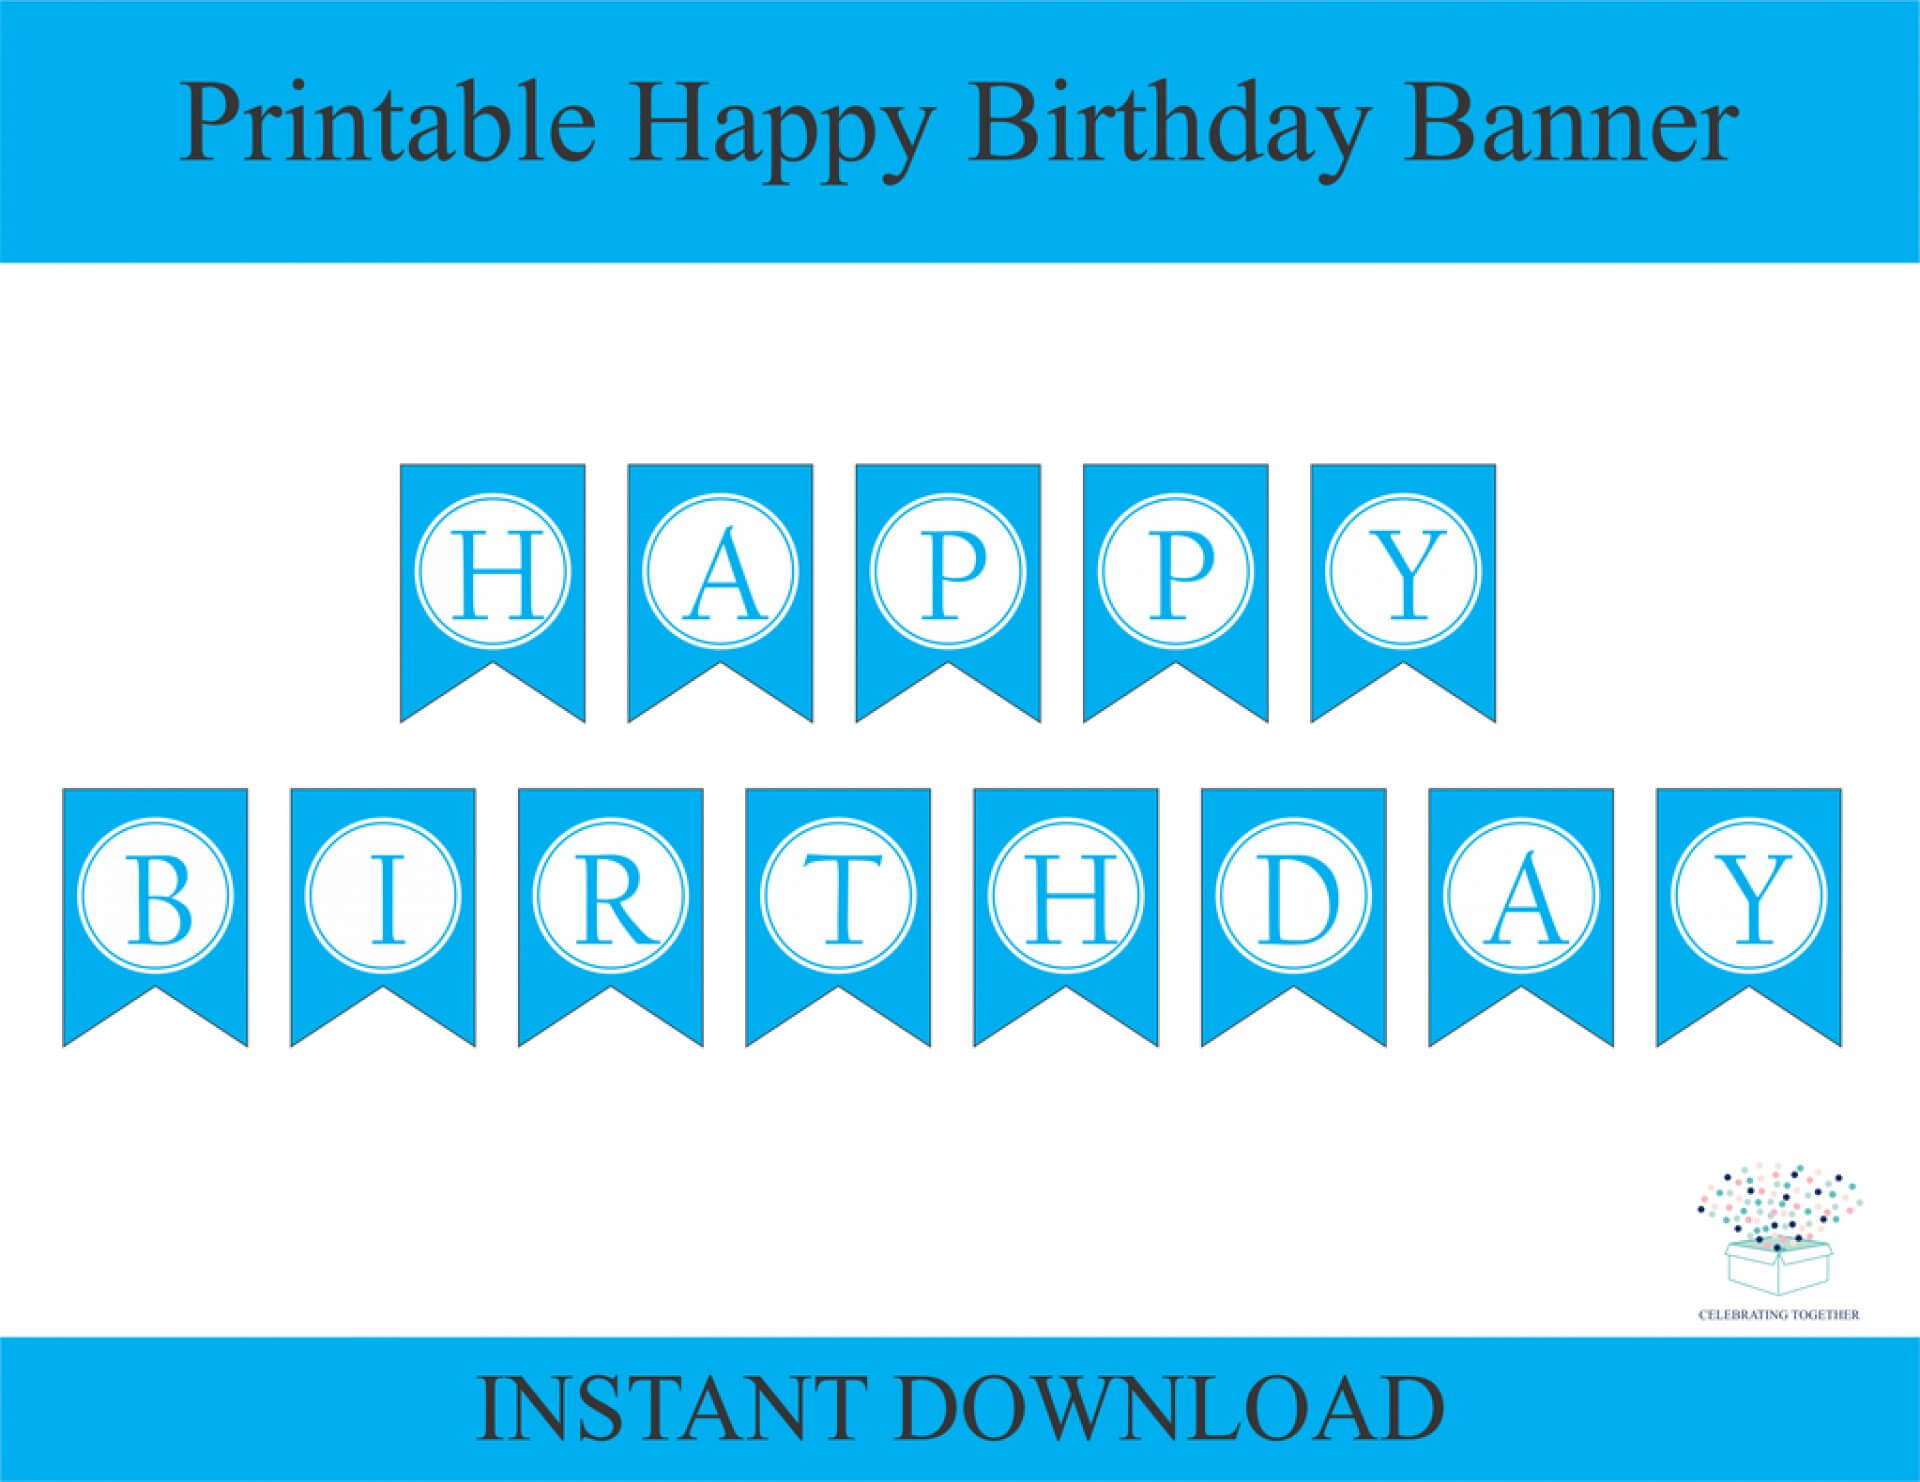 Feb Diy Birthday Banner Template | Wiring Resources In Diy Party Banner Template